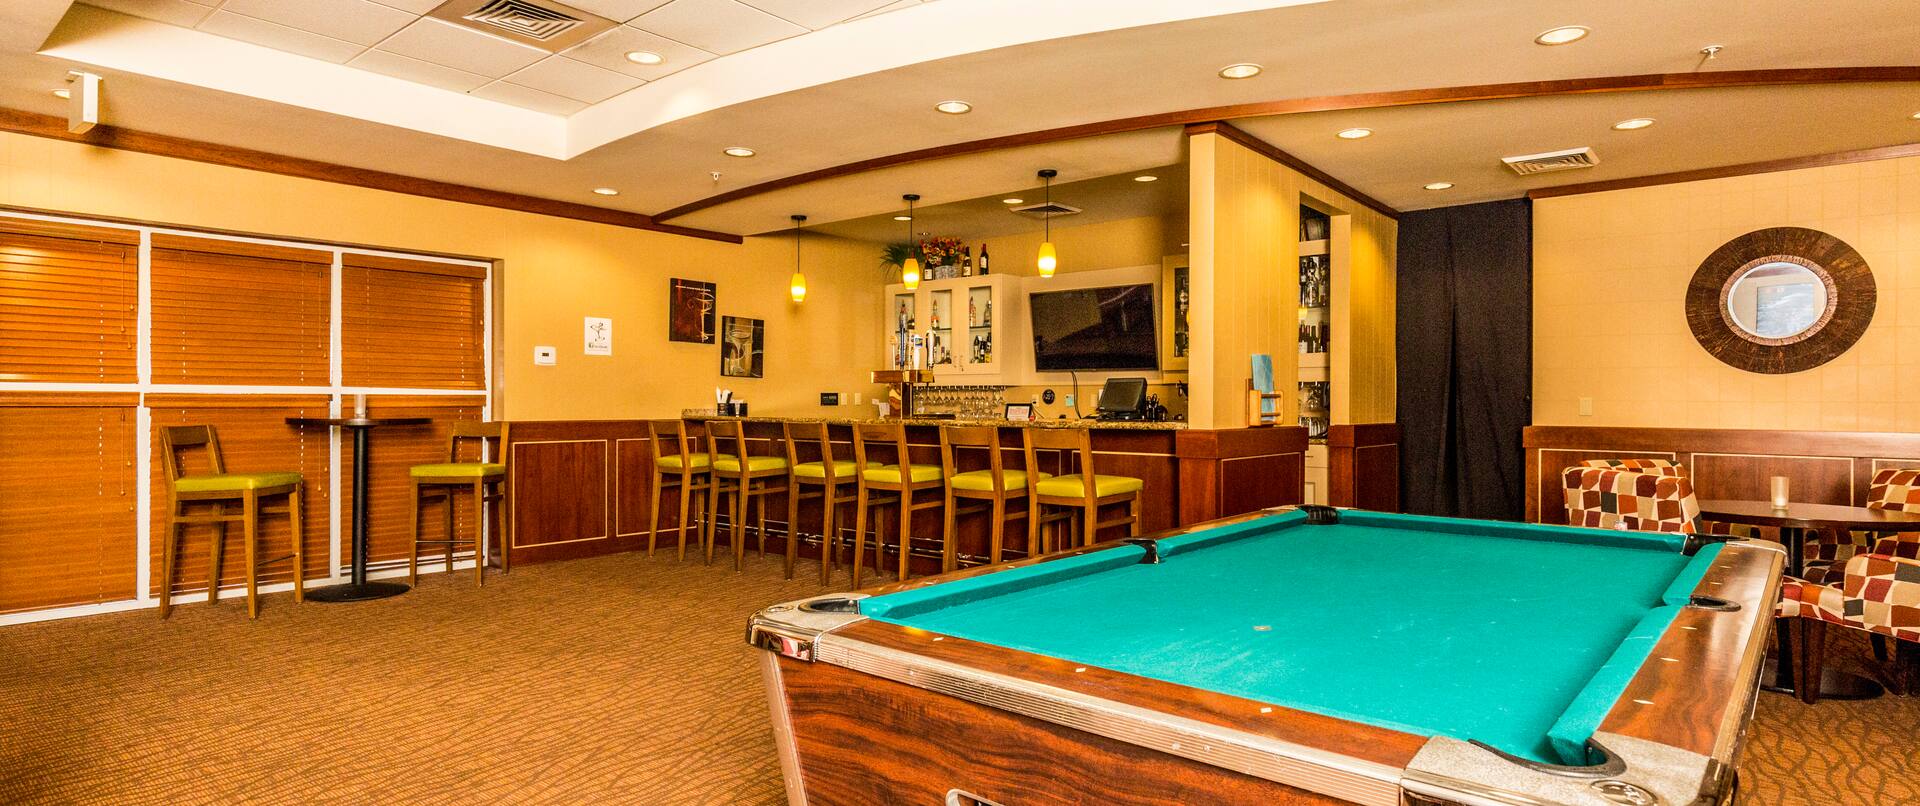 The Office Lounge with Bar and Pool Table